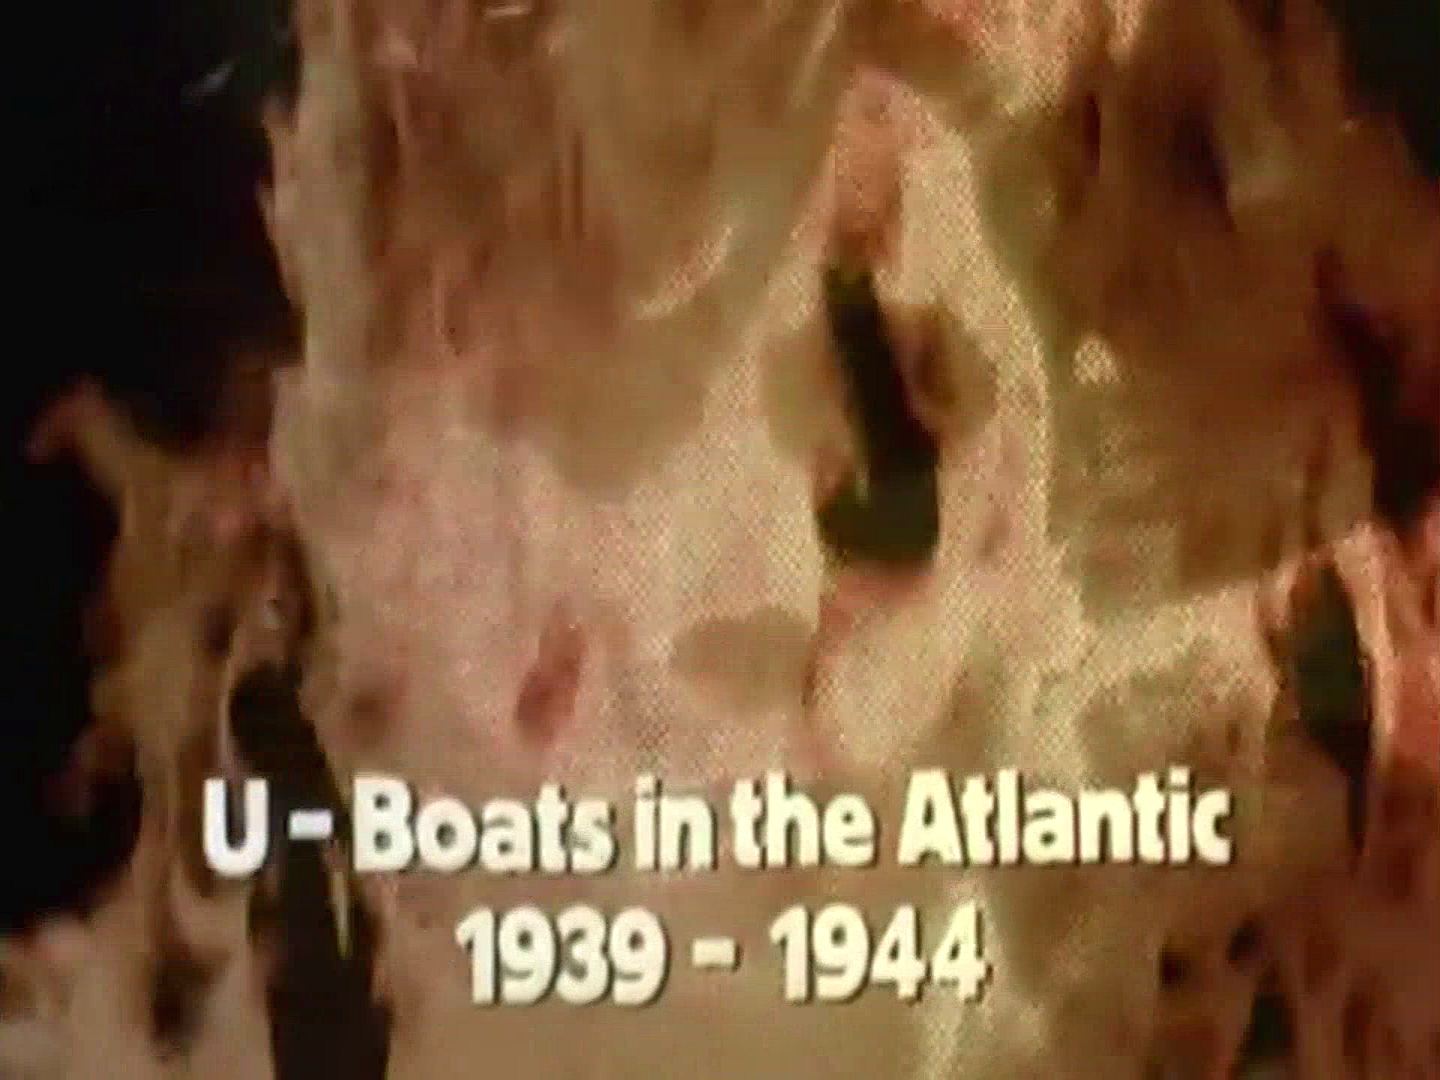 Main title from the 1974 ‘Wolf Pack’ episode of The World at War (1973-74) (2). U-Boats in the Atlantic 1939-1944